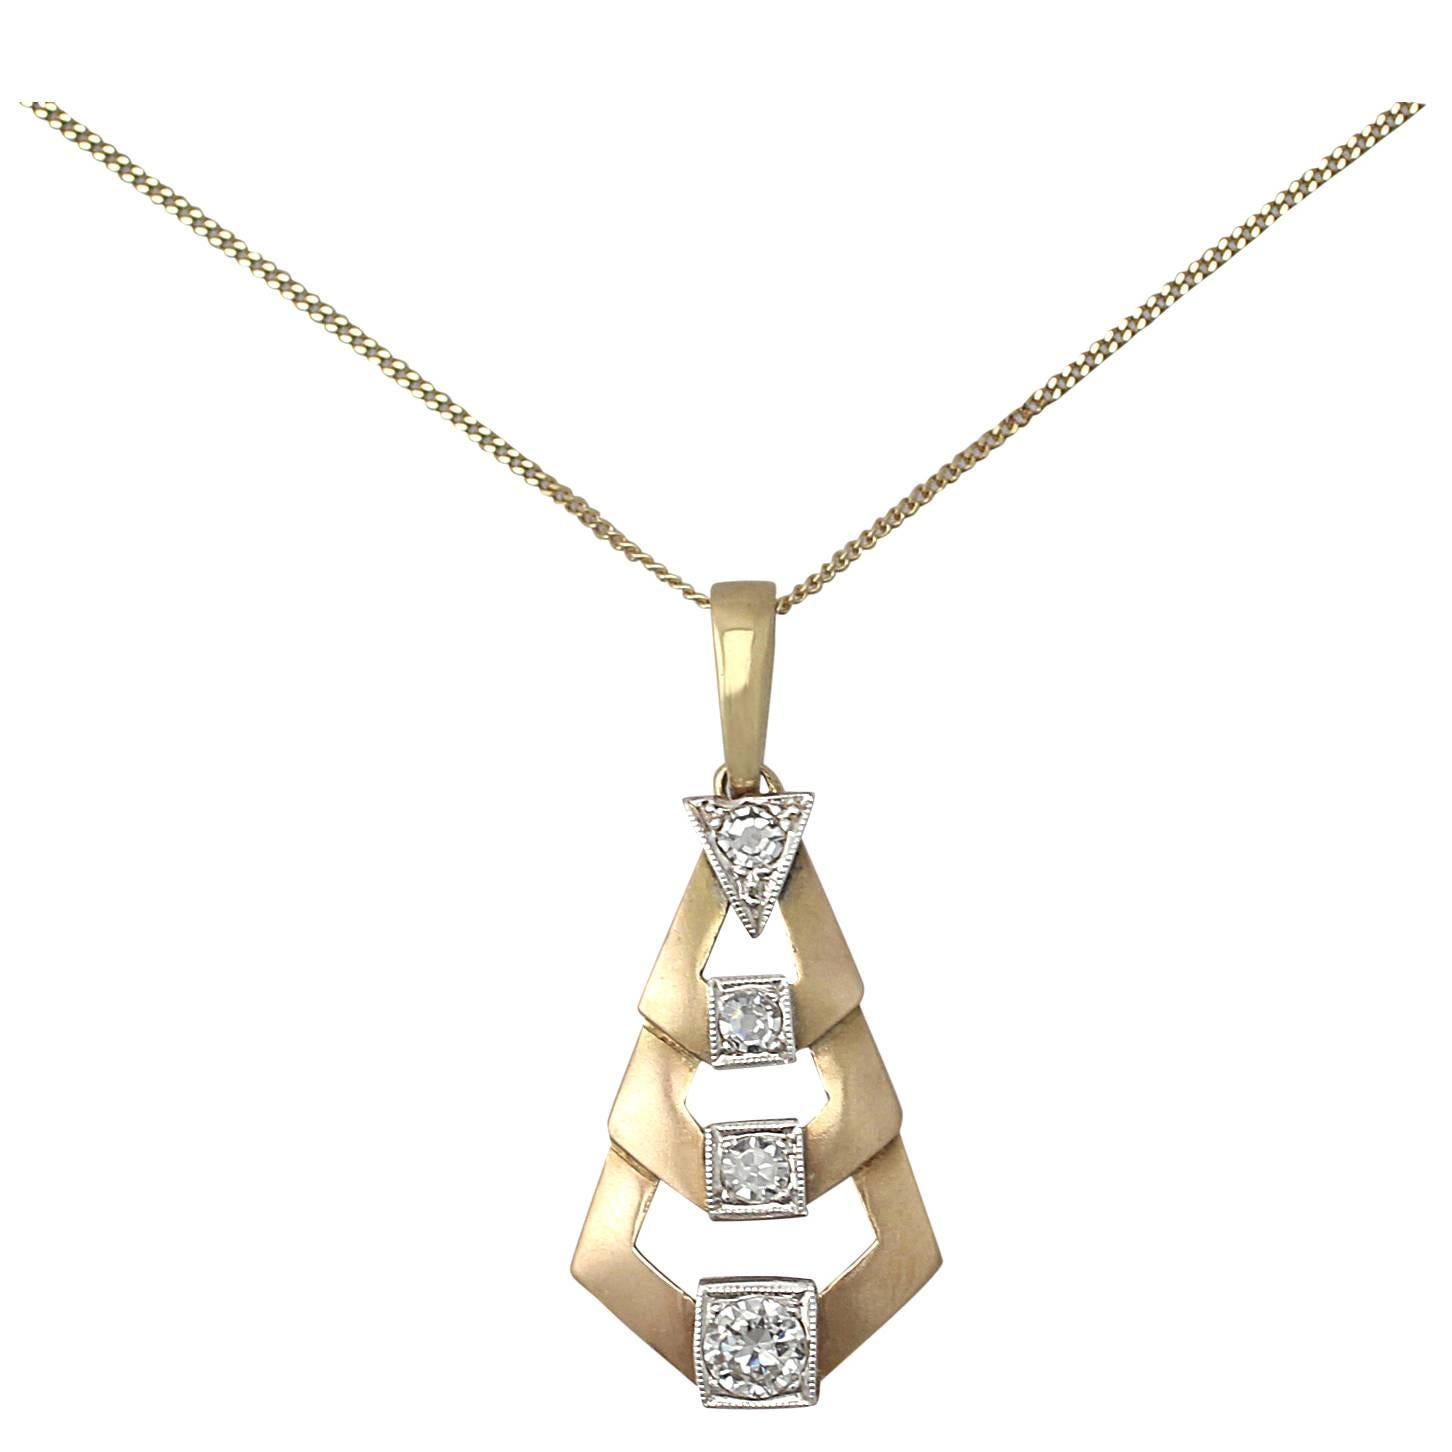 A fine and impressive antique 0.33 carat diamond and 18 karat yellow gold Art Deco pendant; part of our diverse antique and vintage jewelry/estate jewelry collections

This fine Art Deco pendant has been crafted in 18k yellow gold.

This